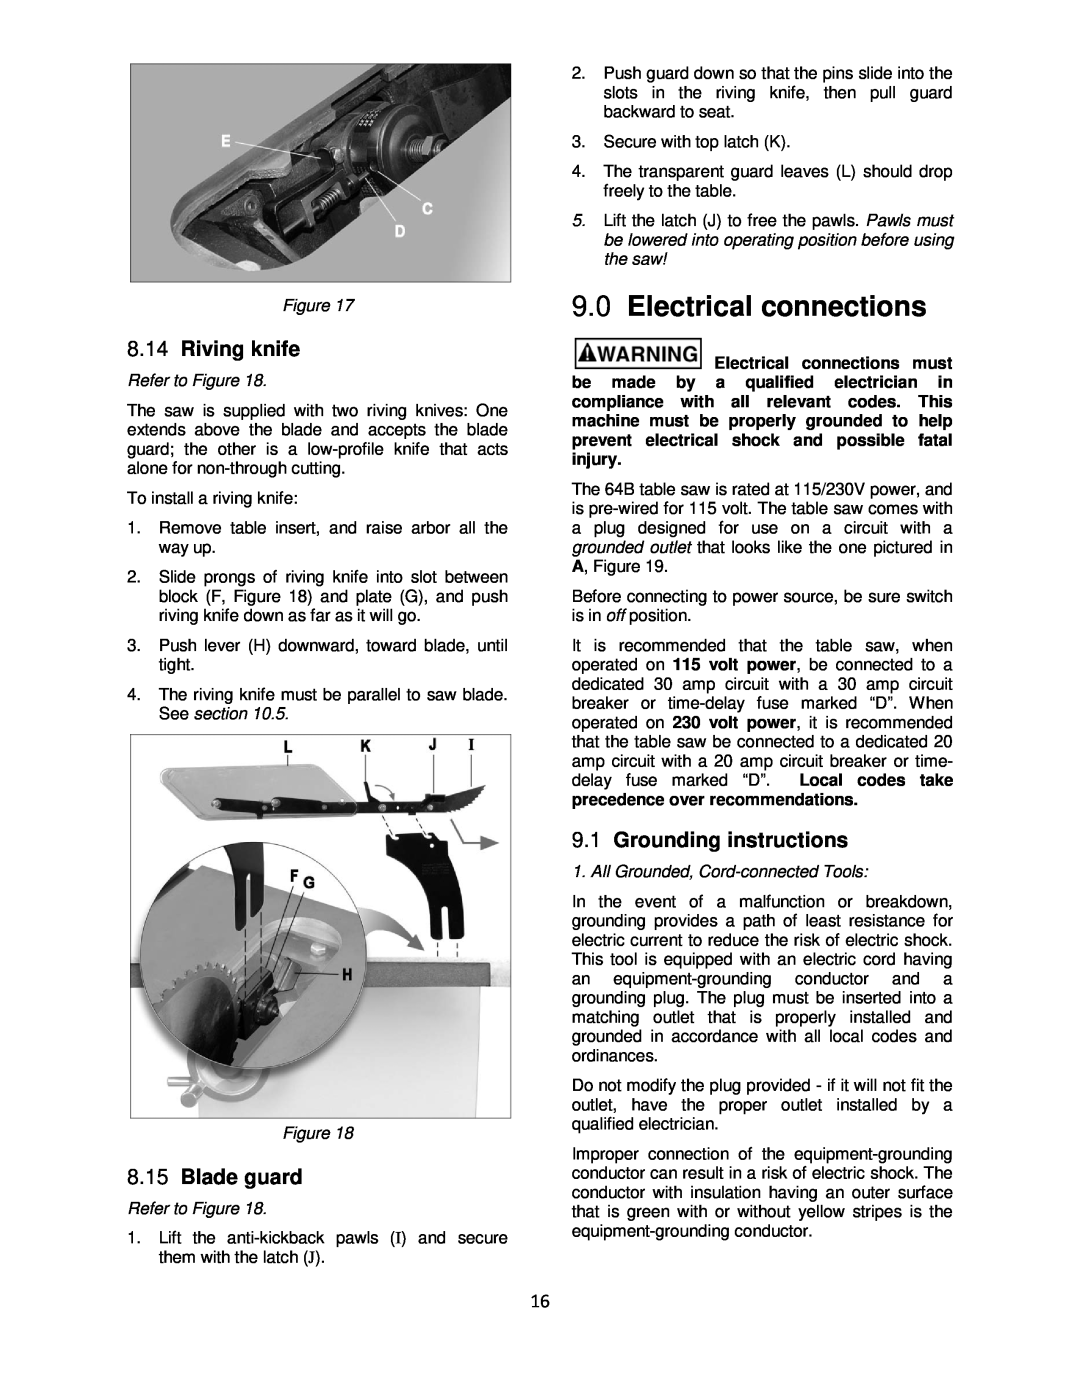 Powermatic 64B operating instructions Electrical connections, Riving knife, Blade guard, Grounding instructions 